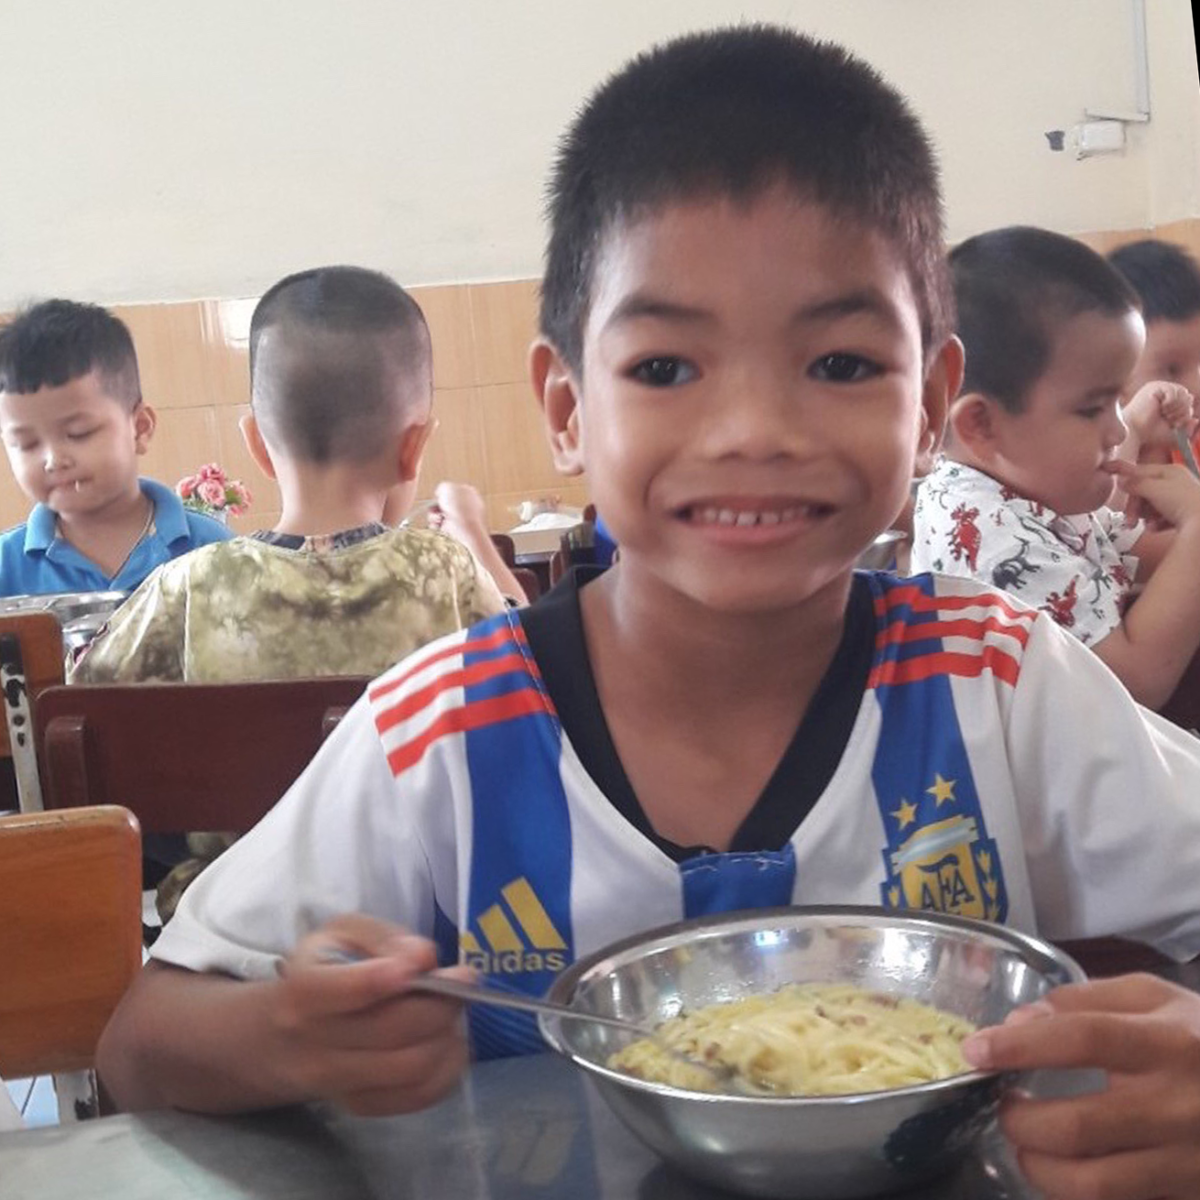 duy eating food thank you for helping duy grow and thrive